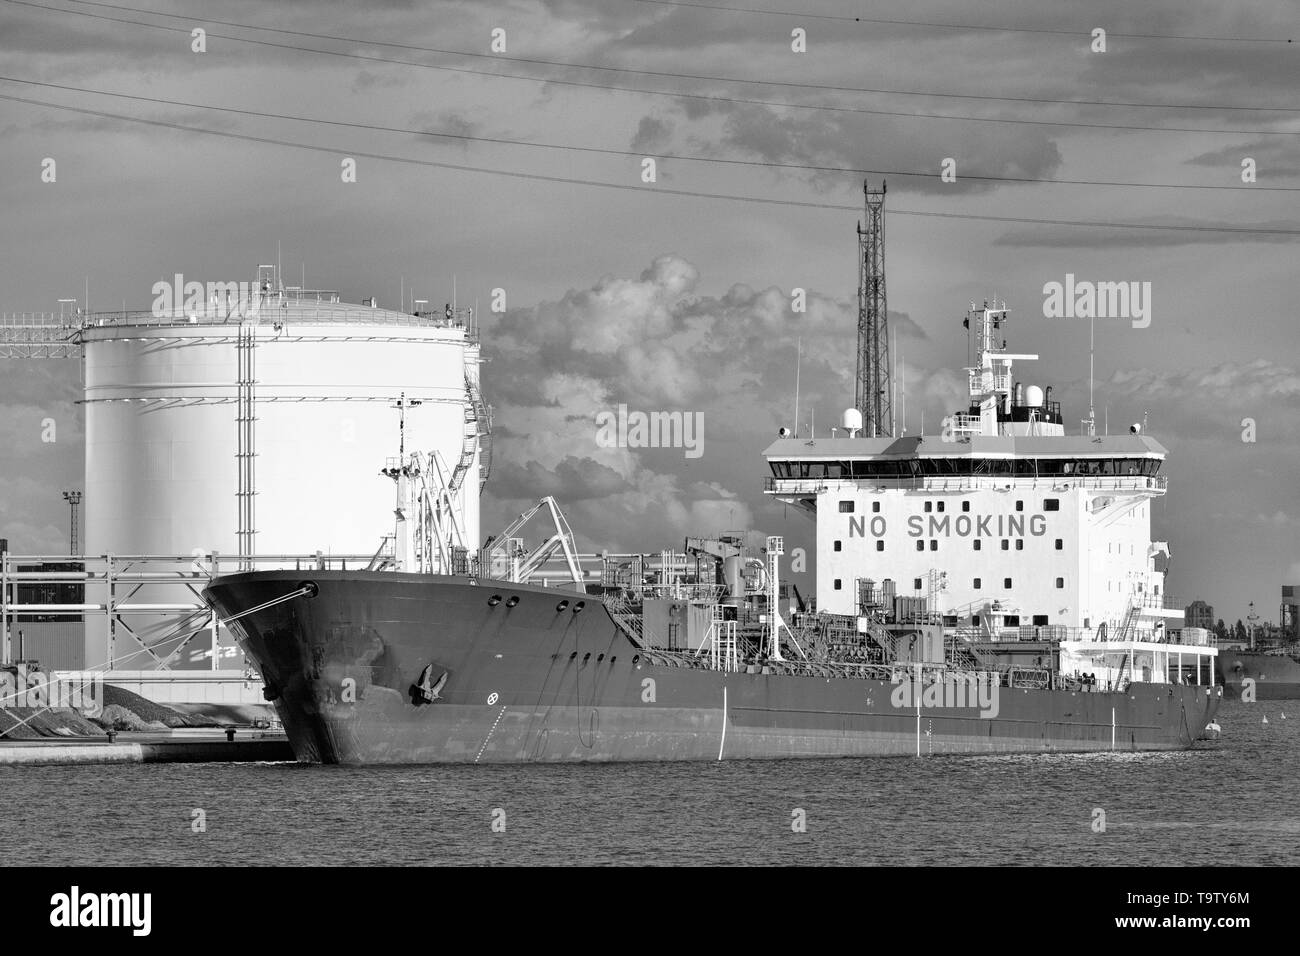 Tanker moored at a petrochemical production plant, Port of Antwerp, Belgium. Stock Photo